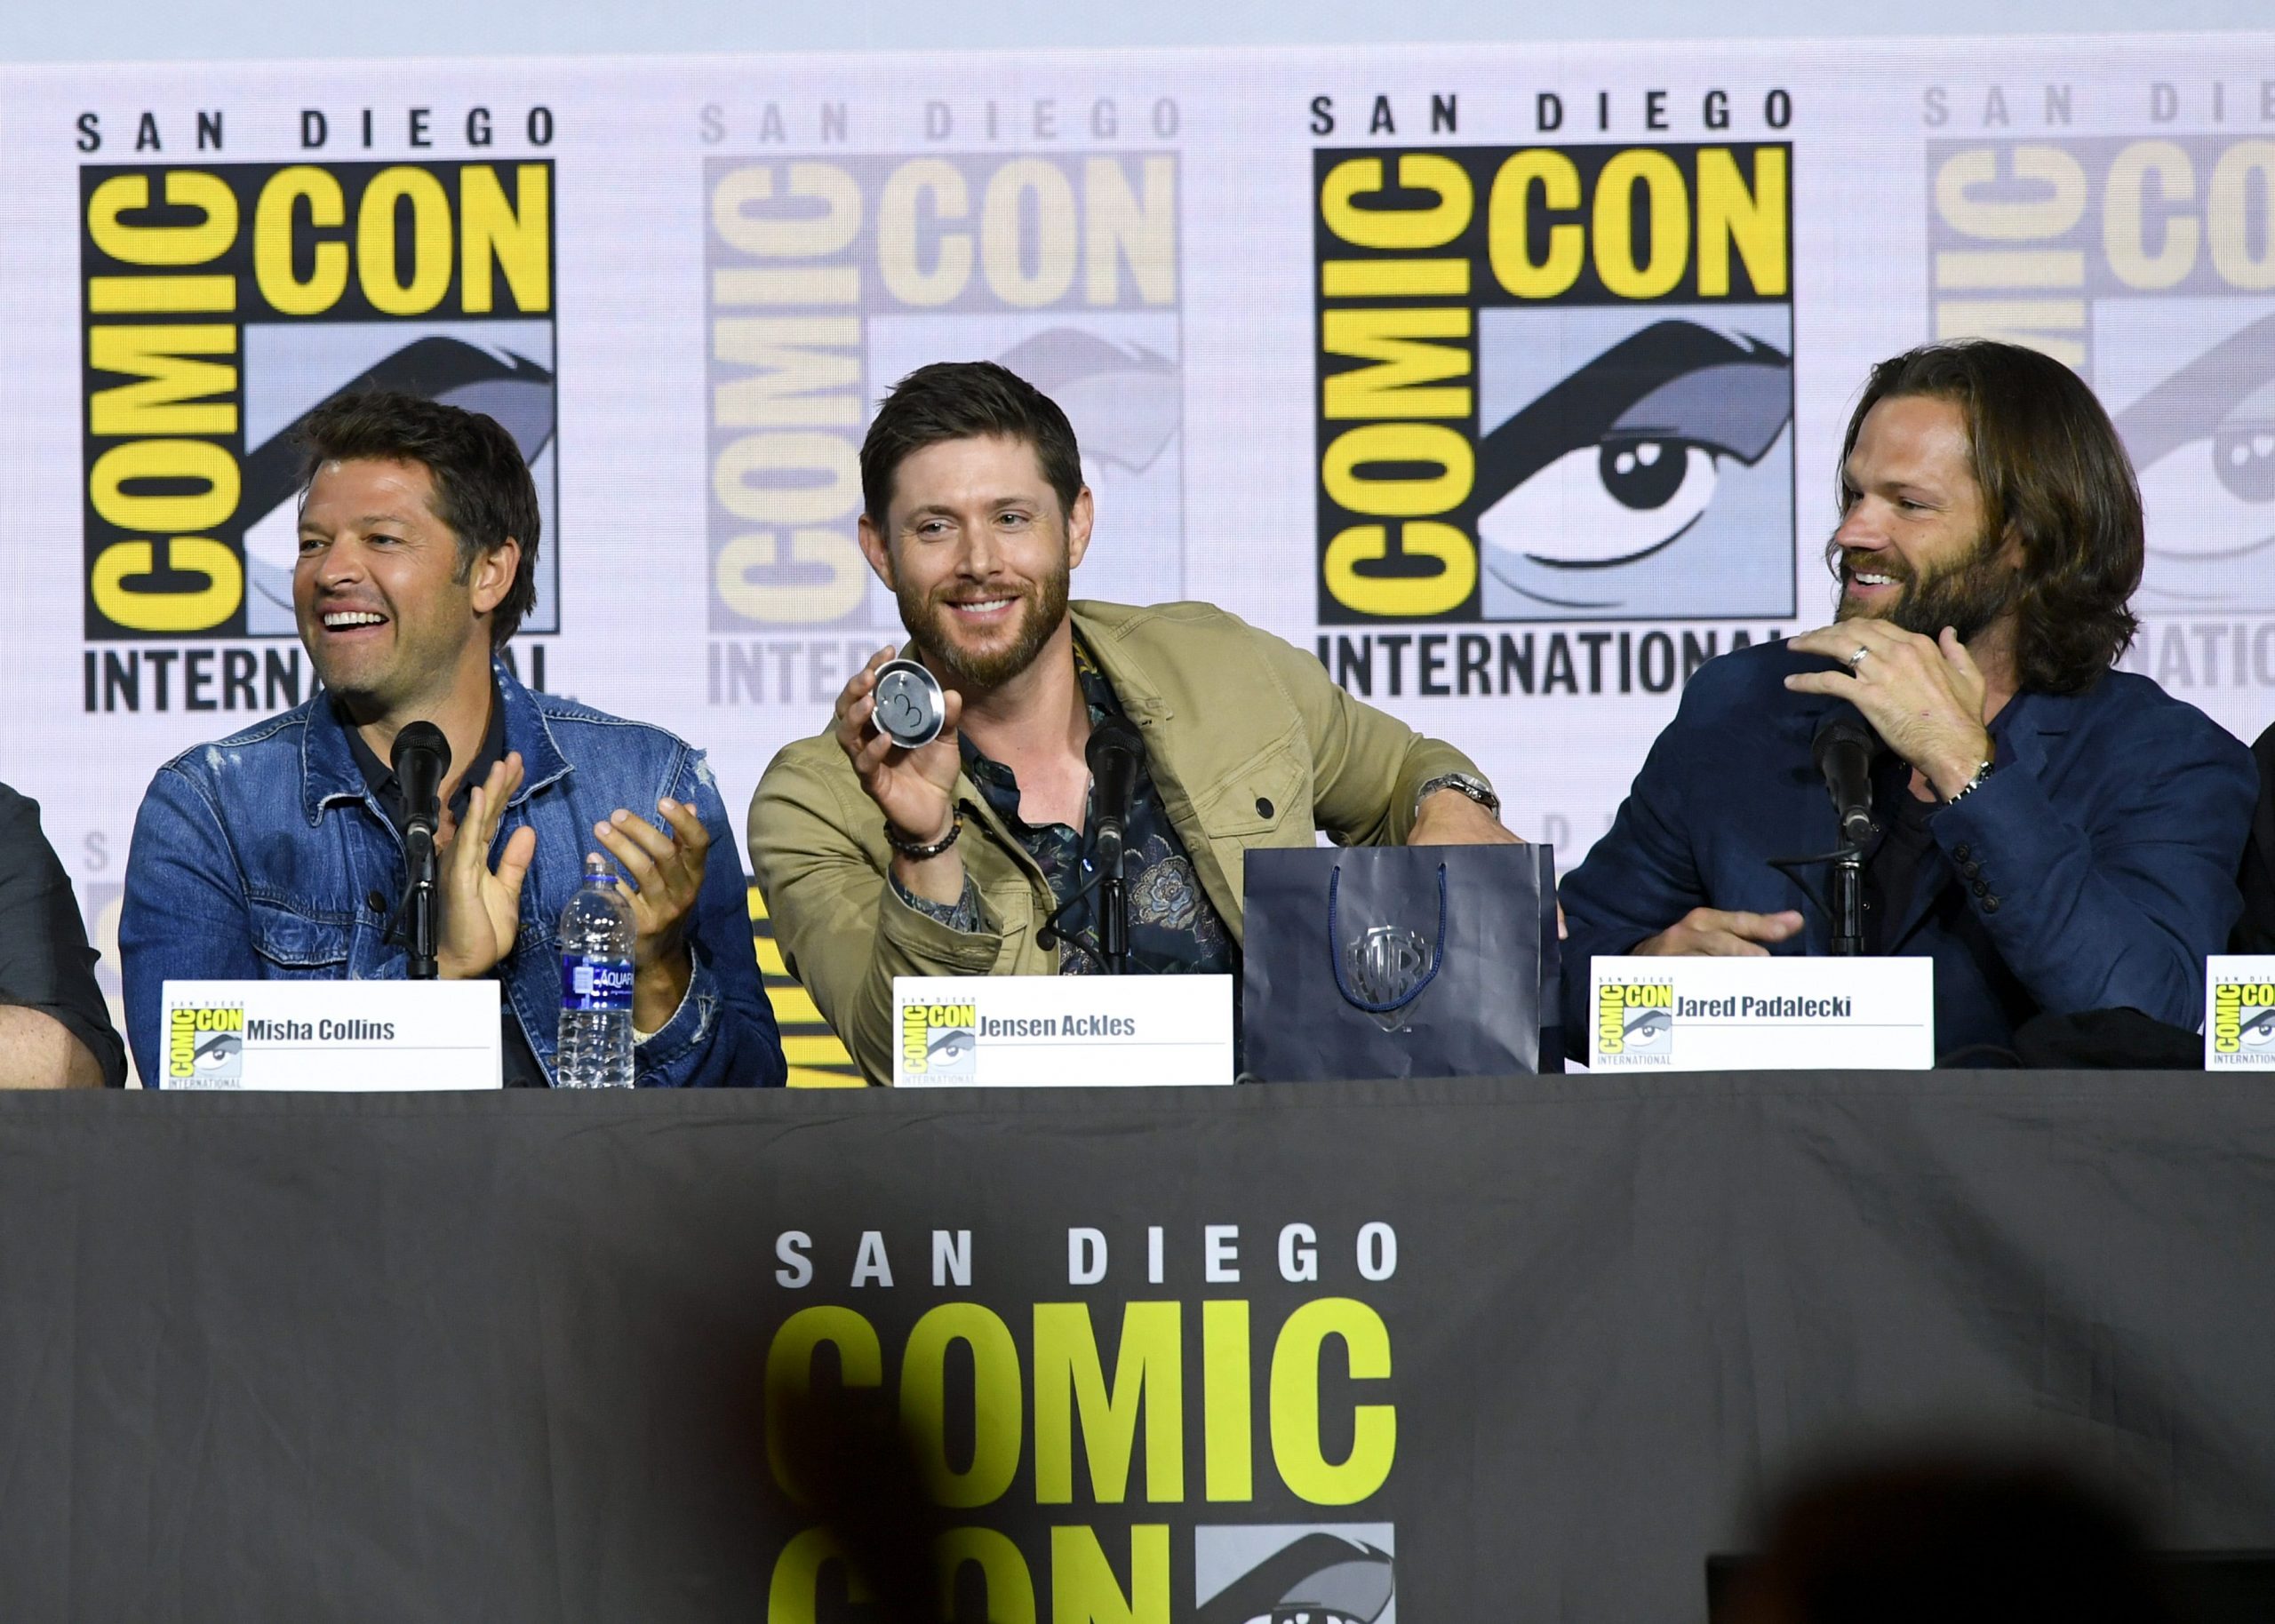 Misha Collins, Jensen Ackles, and Jared Padalecki speak at the "Supernatural" Special Video Presentation and Q&A during 2019 Comic-Con International at San Diego Convention Center on July 21, 2019 in San Diego, California.